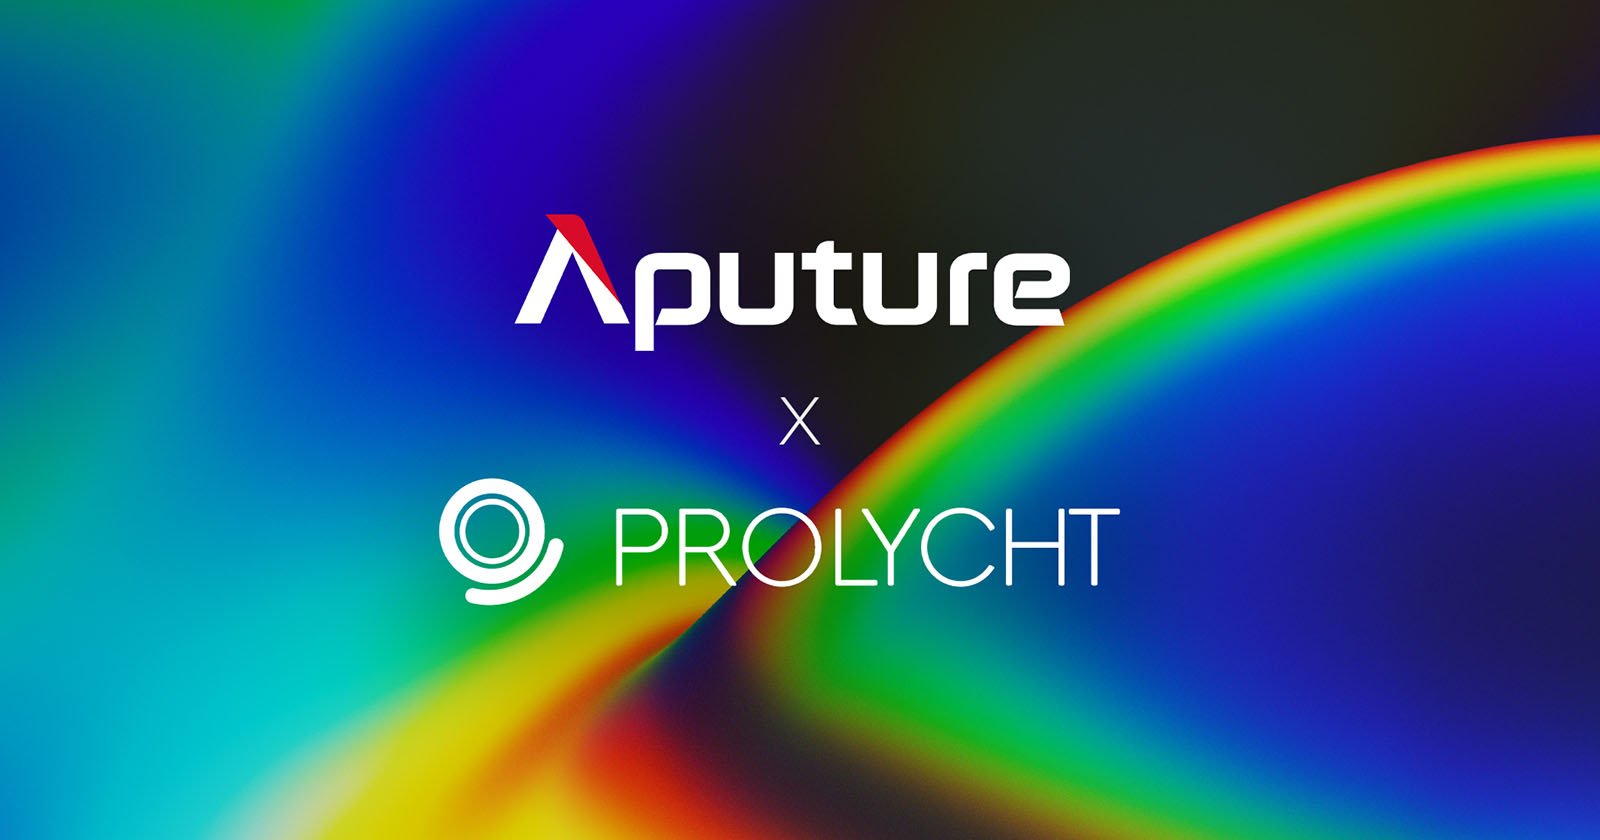 Aputure Has Acquired Film and TV LED Lighting Maker Prolycht